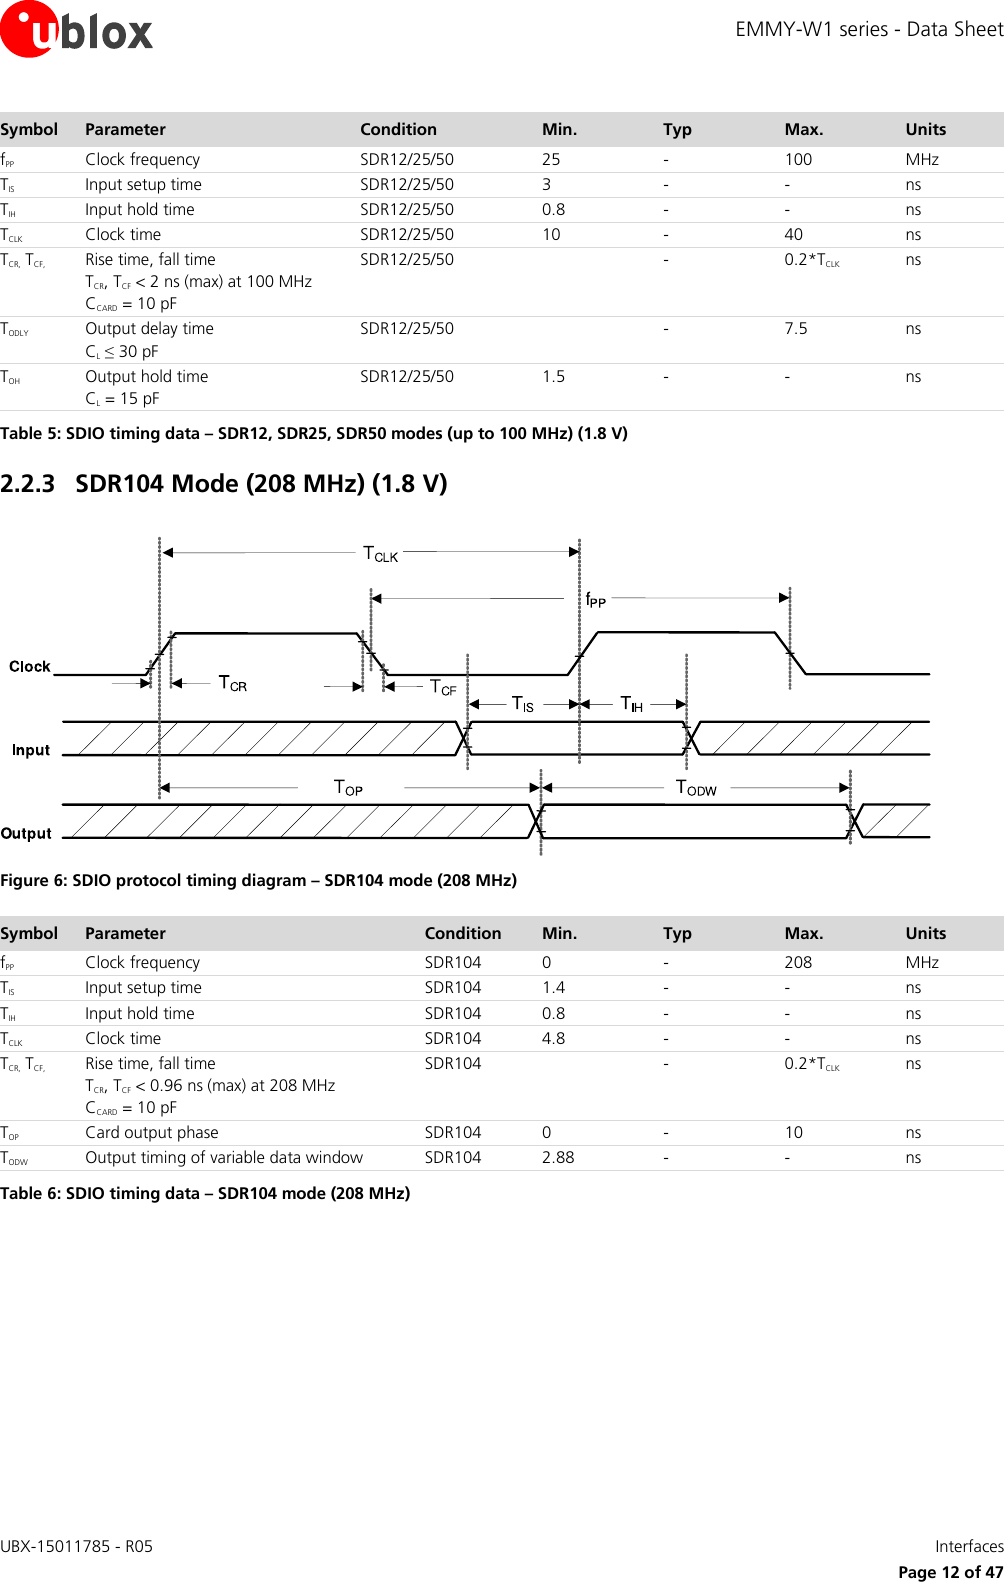 EMMY-W1 series - Data Sheet UBX-15011785 - R05   Interfaces     Page 12 of 47 Symbol Parameter Condition Min.        Typ Max. Units fPP Clock frequency SDR12/25/50 25 - 100 MHz TIS Input setup time SDR12/25/50 3 - - ns TIH Input hold time SDR12/25/50 0.8 - - ns TCLK Clock time  SDR12/25/50 10 - 40 ns TCR,  TCF, Rise time, fall time  TCR, TCF &lt; 2 ns (max) at 100 MHz  CCARD = 10 pF SDR12/25/50  - 0.2*TCLK ns TODLY Output delay time CL ≤ 30 pF SDR12/25/50  - 7.5 ns TOH Output hold time CL = 15 pF   SDR12/25/50 1.5 - - ns Table 5: SDIO timing data – SDR12, SDR25, SDR50 modes (up to 100 MHz) (1.8 V) 2.2.3 SDR104 Mode (208 MHz) (1.8 V)   Figure 6: SDIO protocol timing diagram – SDR104 mode (208 MHz) Symbol Parameter Condition Min.        Typ Max. Units fPP Clock frequency SDR104 0 - 208 MHz TIS Input setup time SDR104 1.4 - - ns TIH Input hold time SDR104 0.8 - - ns TCLK Clock time  SDR104 4.8 - - ns TCR,  TCF, Rise time, fall time  TCR, TCF &lt; 0.96 ns (max) at 208 MHz  CCARD = 10 pF SDR104  - 0.2*TCLK ns TOP Card output phase SDR104 0 - 10 ns TODW Output timing of variable data window   SDR104 2.88 - - ns Table 6: SDIO timing data – SDR104 mode (208 MHz) 